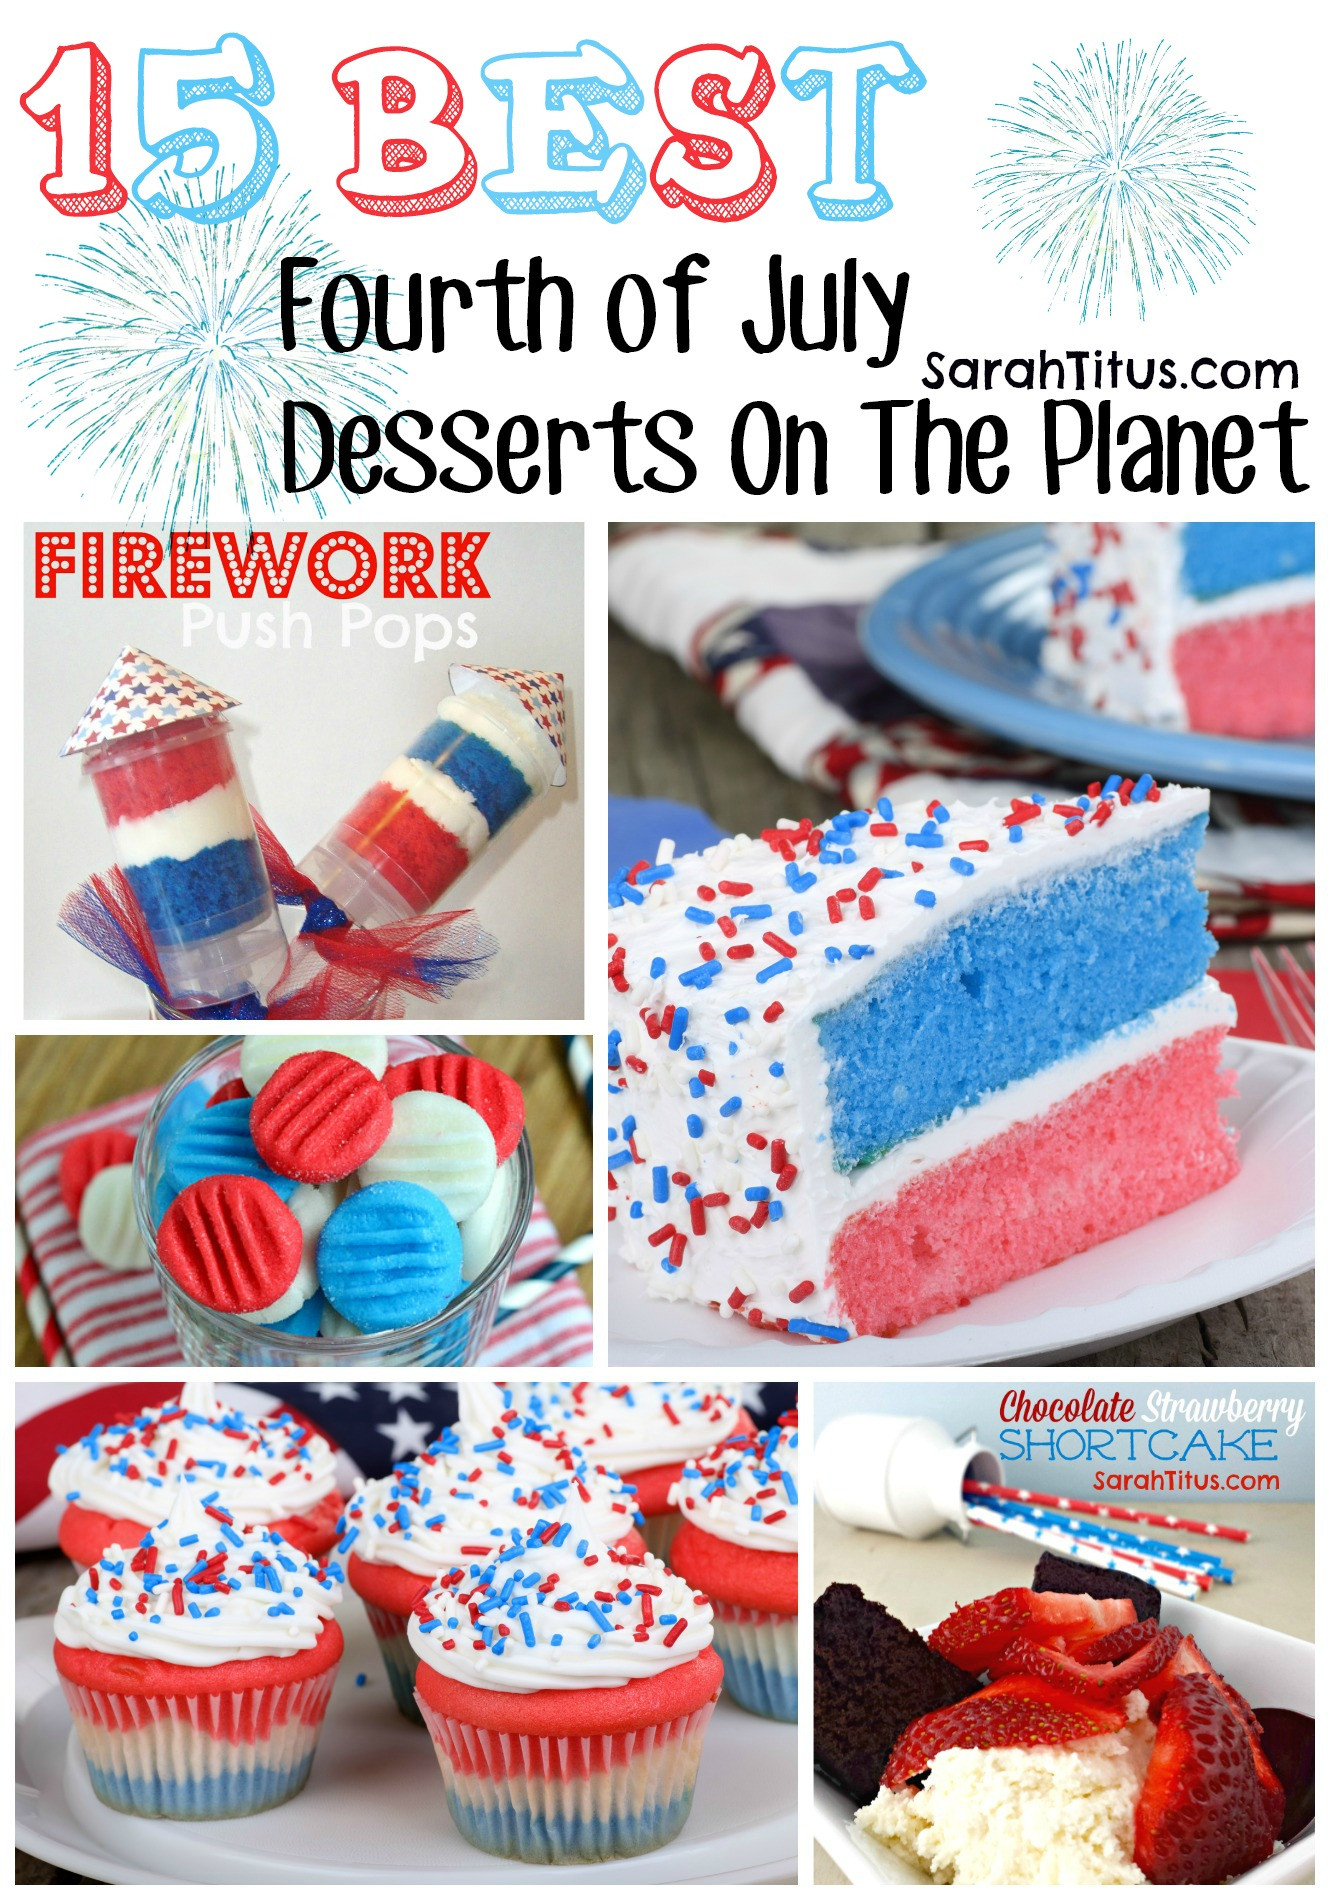 Best Fourth Of July Desserts
 15 Best Fourth of July Desserts The Planet Sarah Titus